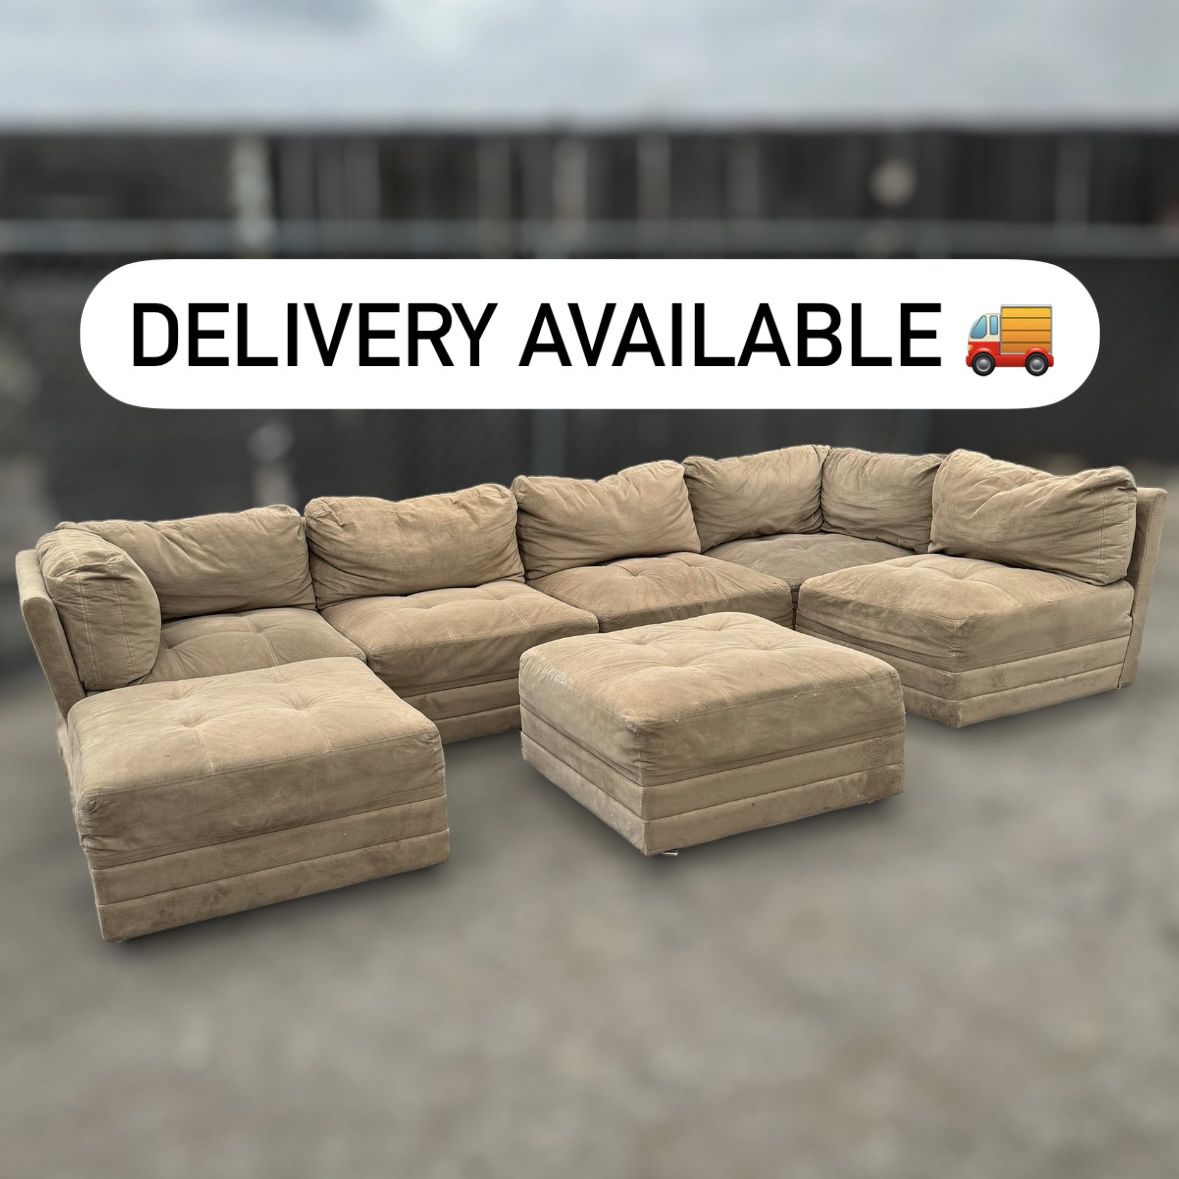 Beige/Tan Modular 7 Piece Sectional Sofa Couch Ottoman Set - 🚚 DELIVERY AVAILABLE 